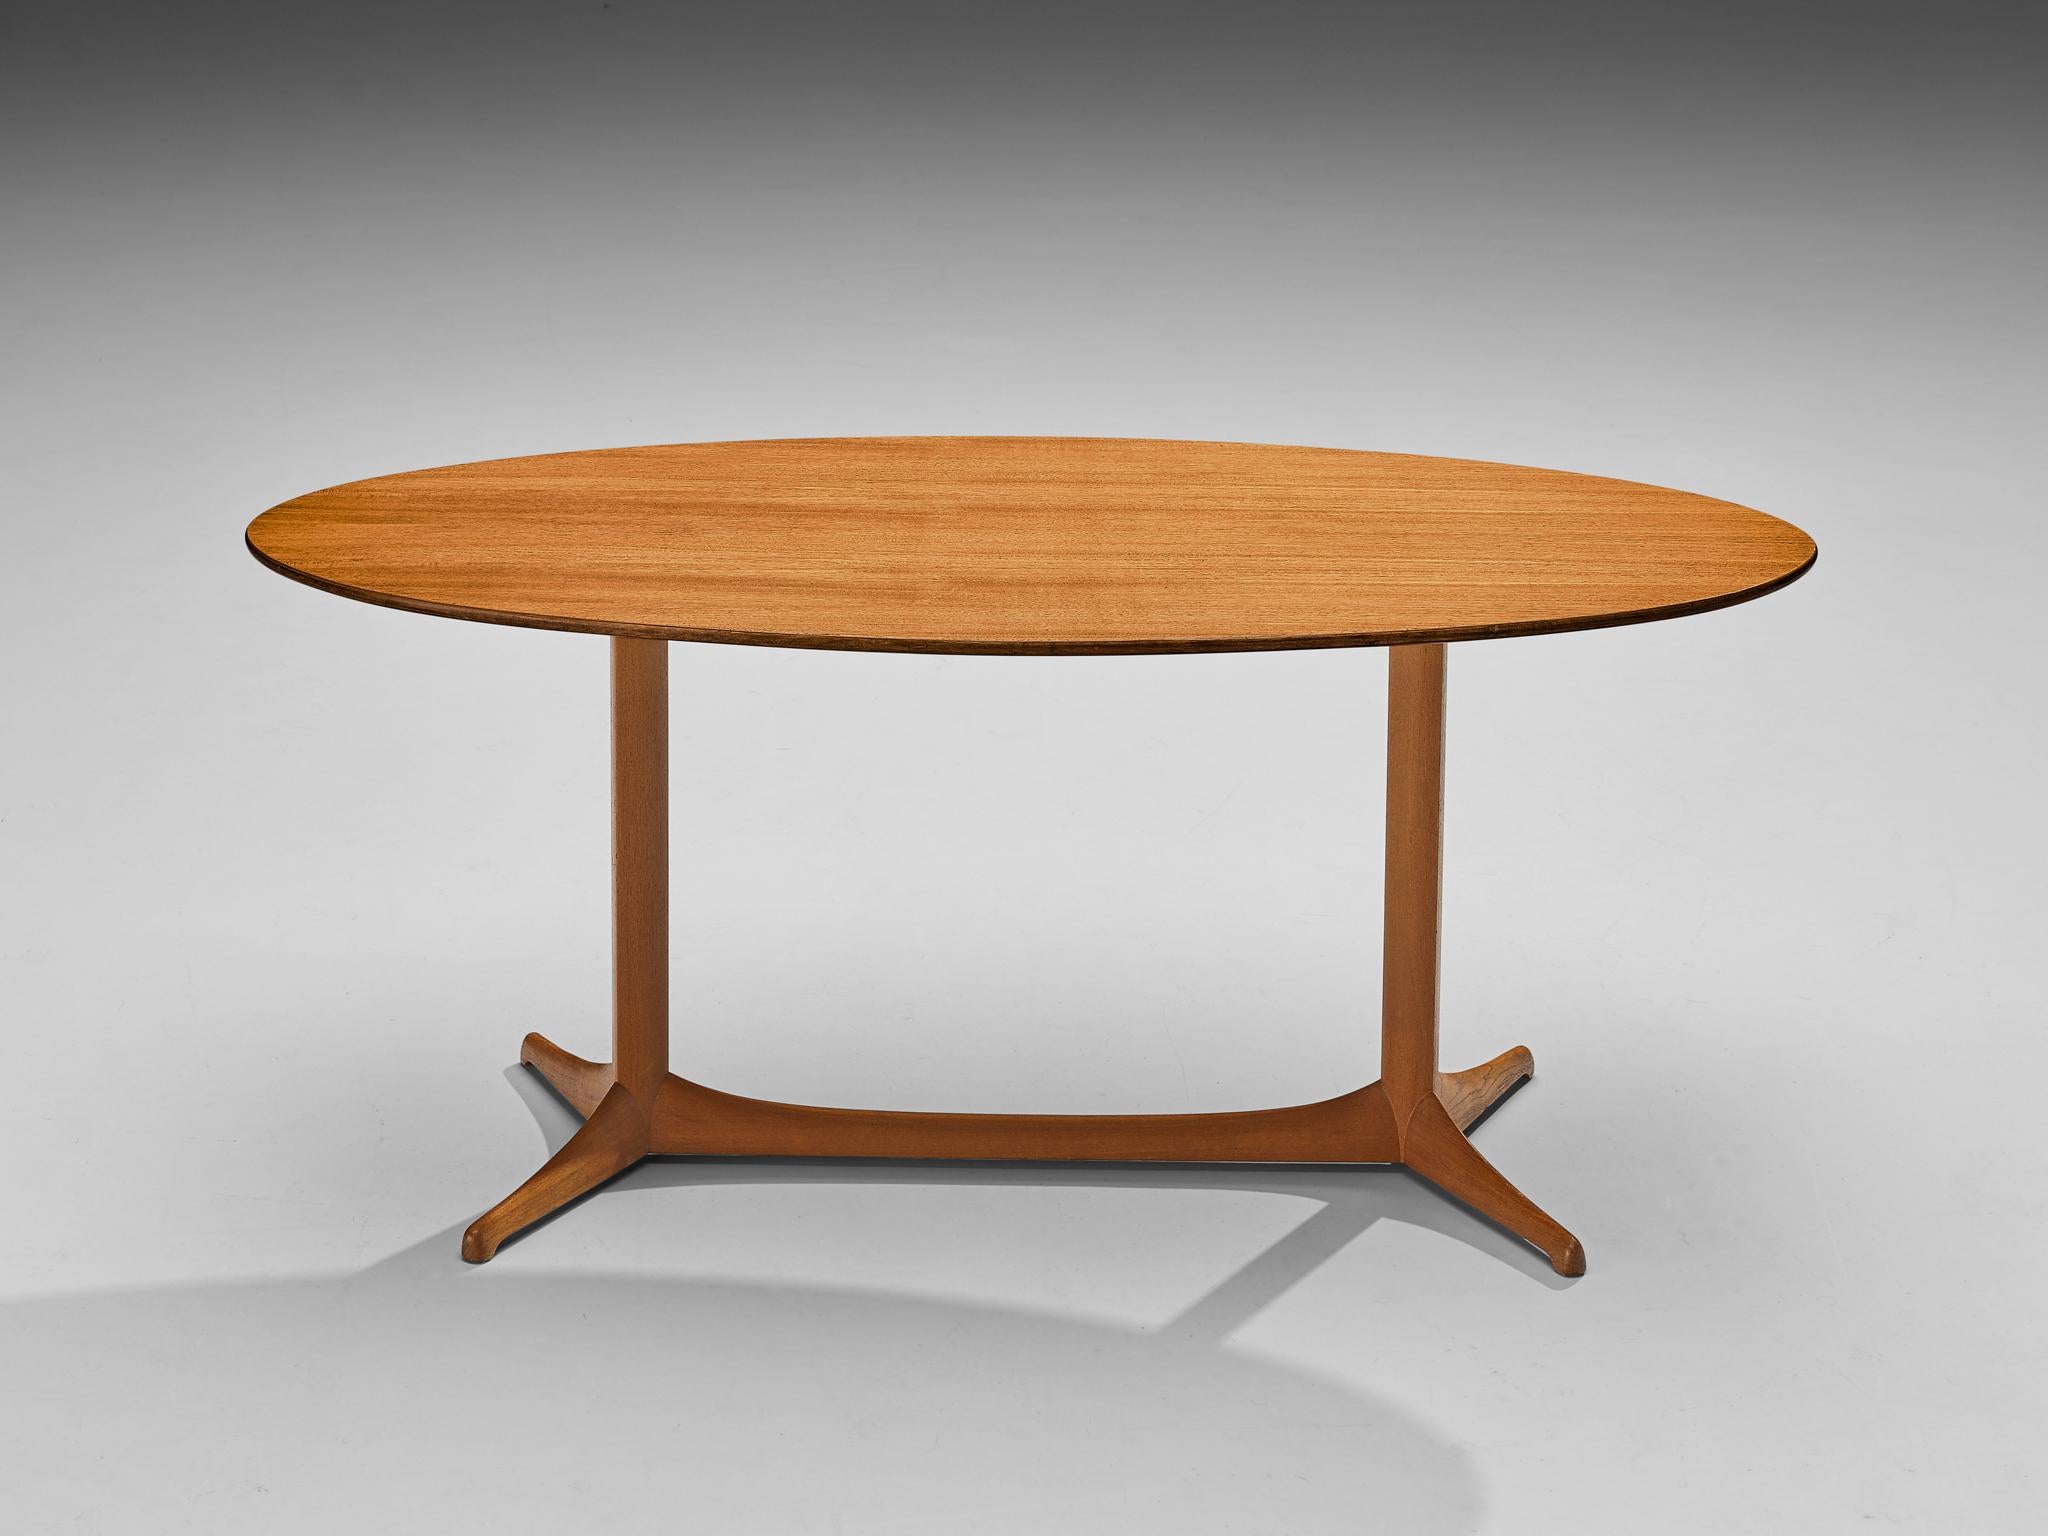 Kerstin Hörlin-Holmquist for Nordiska Kompaniet, coffee table 'Plommonet', teak, Sweden, 1953.

This coffee table is well-constructed in a precise manner and bears visual traits that is typical for Swedish design. The oval top is supported by an